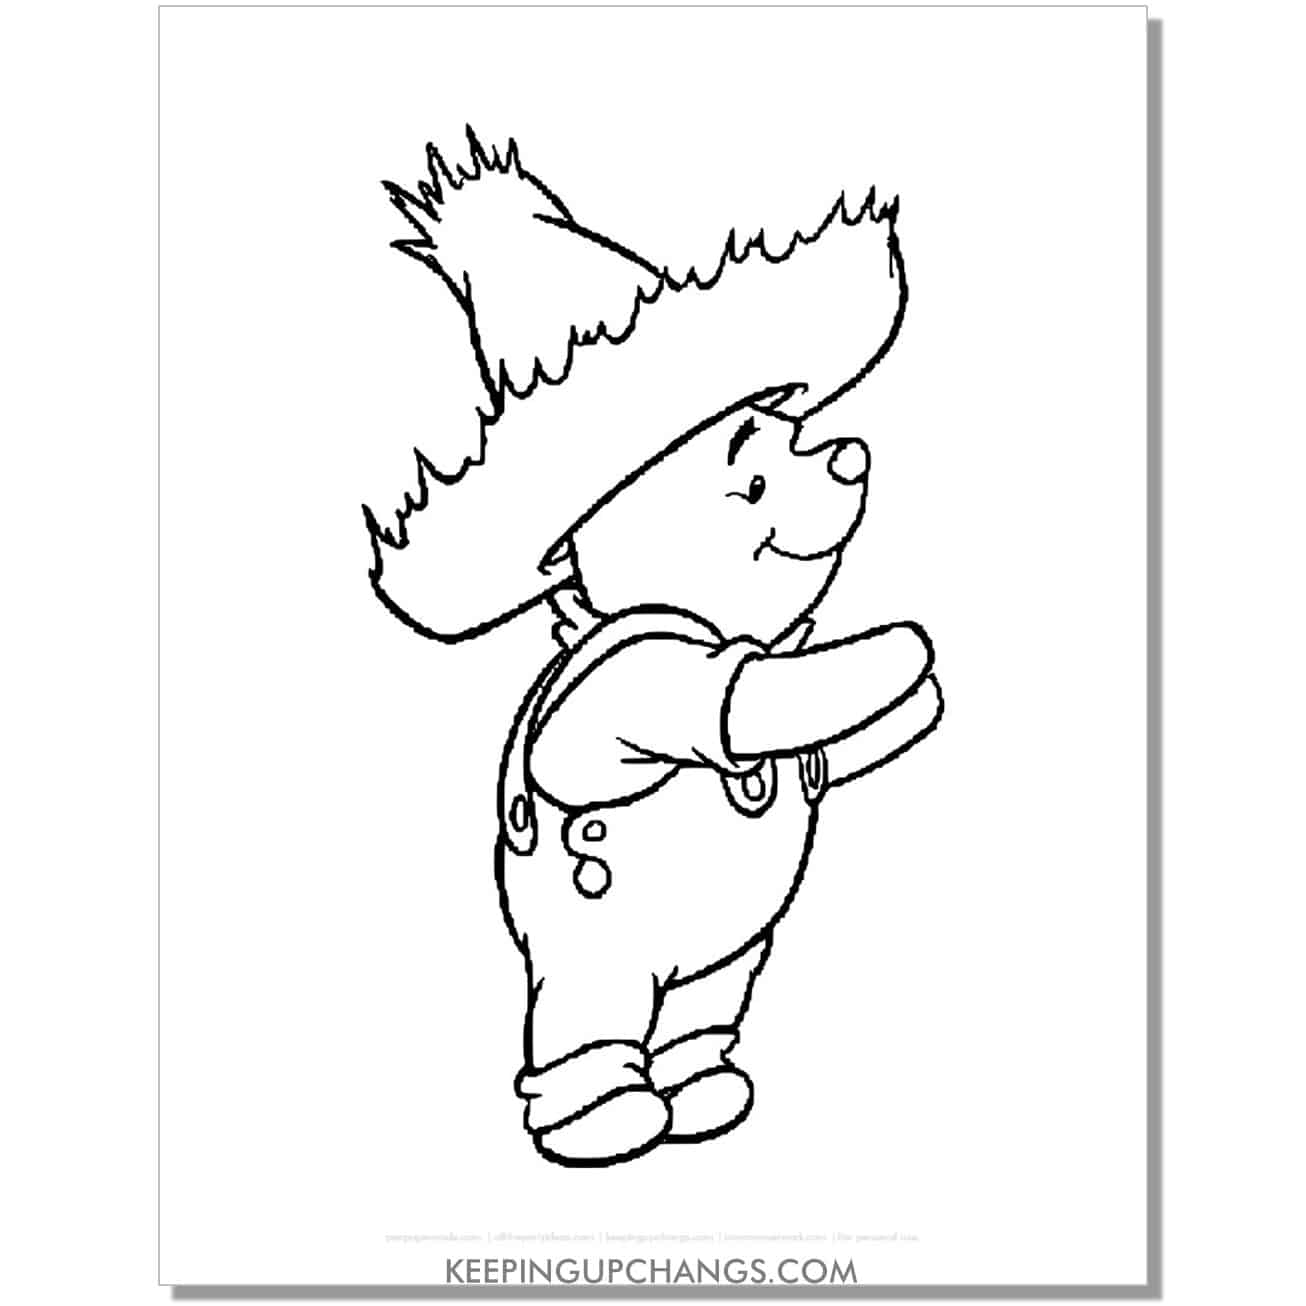 winnie the pooh with straw hat in overalls coloring page, sheet.